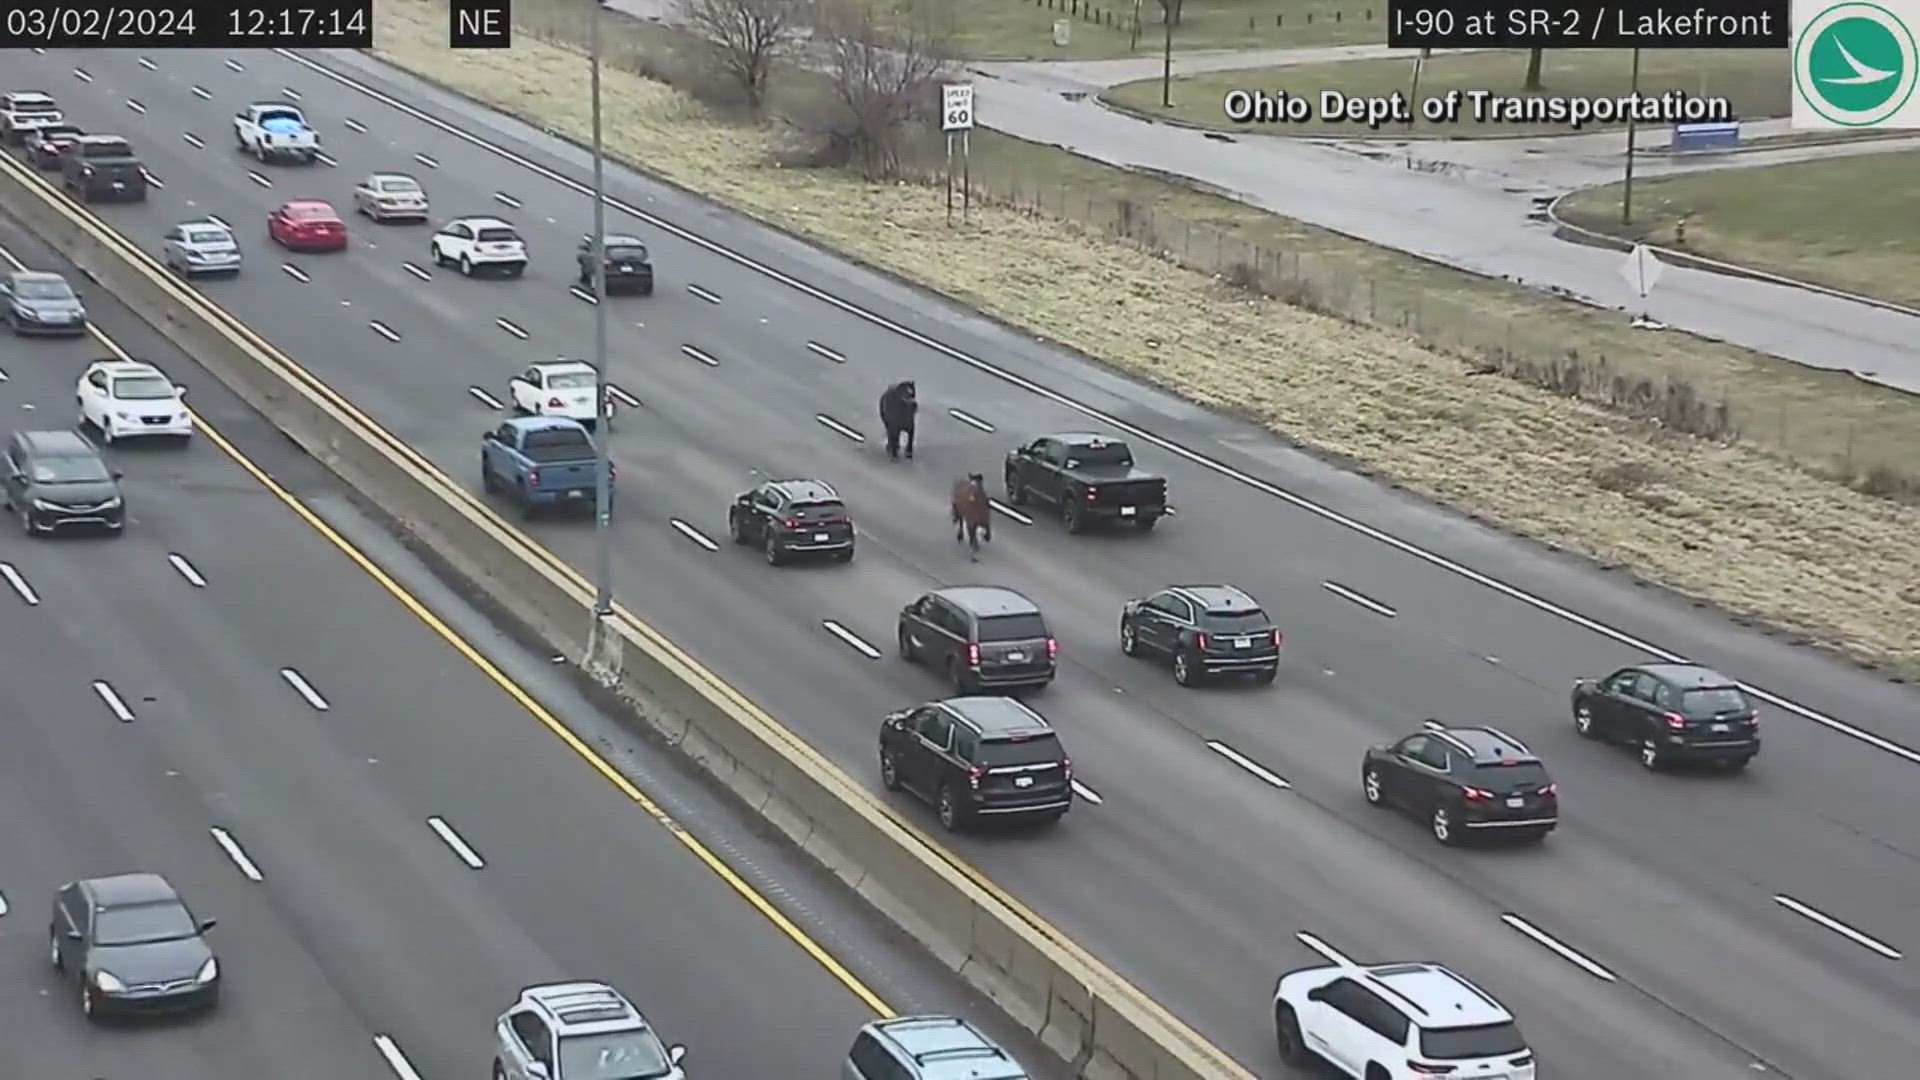 Two horses took to the streets in Cleveland Ohio, causing cars to stop. Thankfully, both horses were safely recovered.